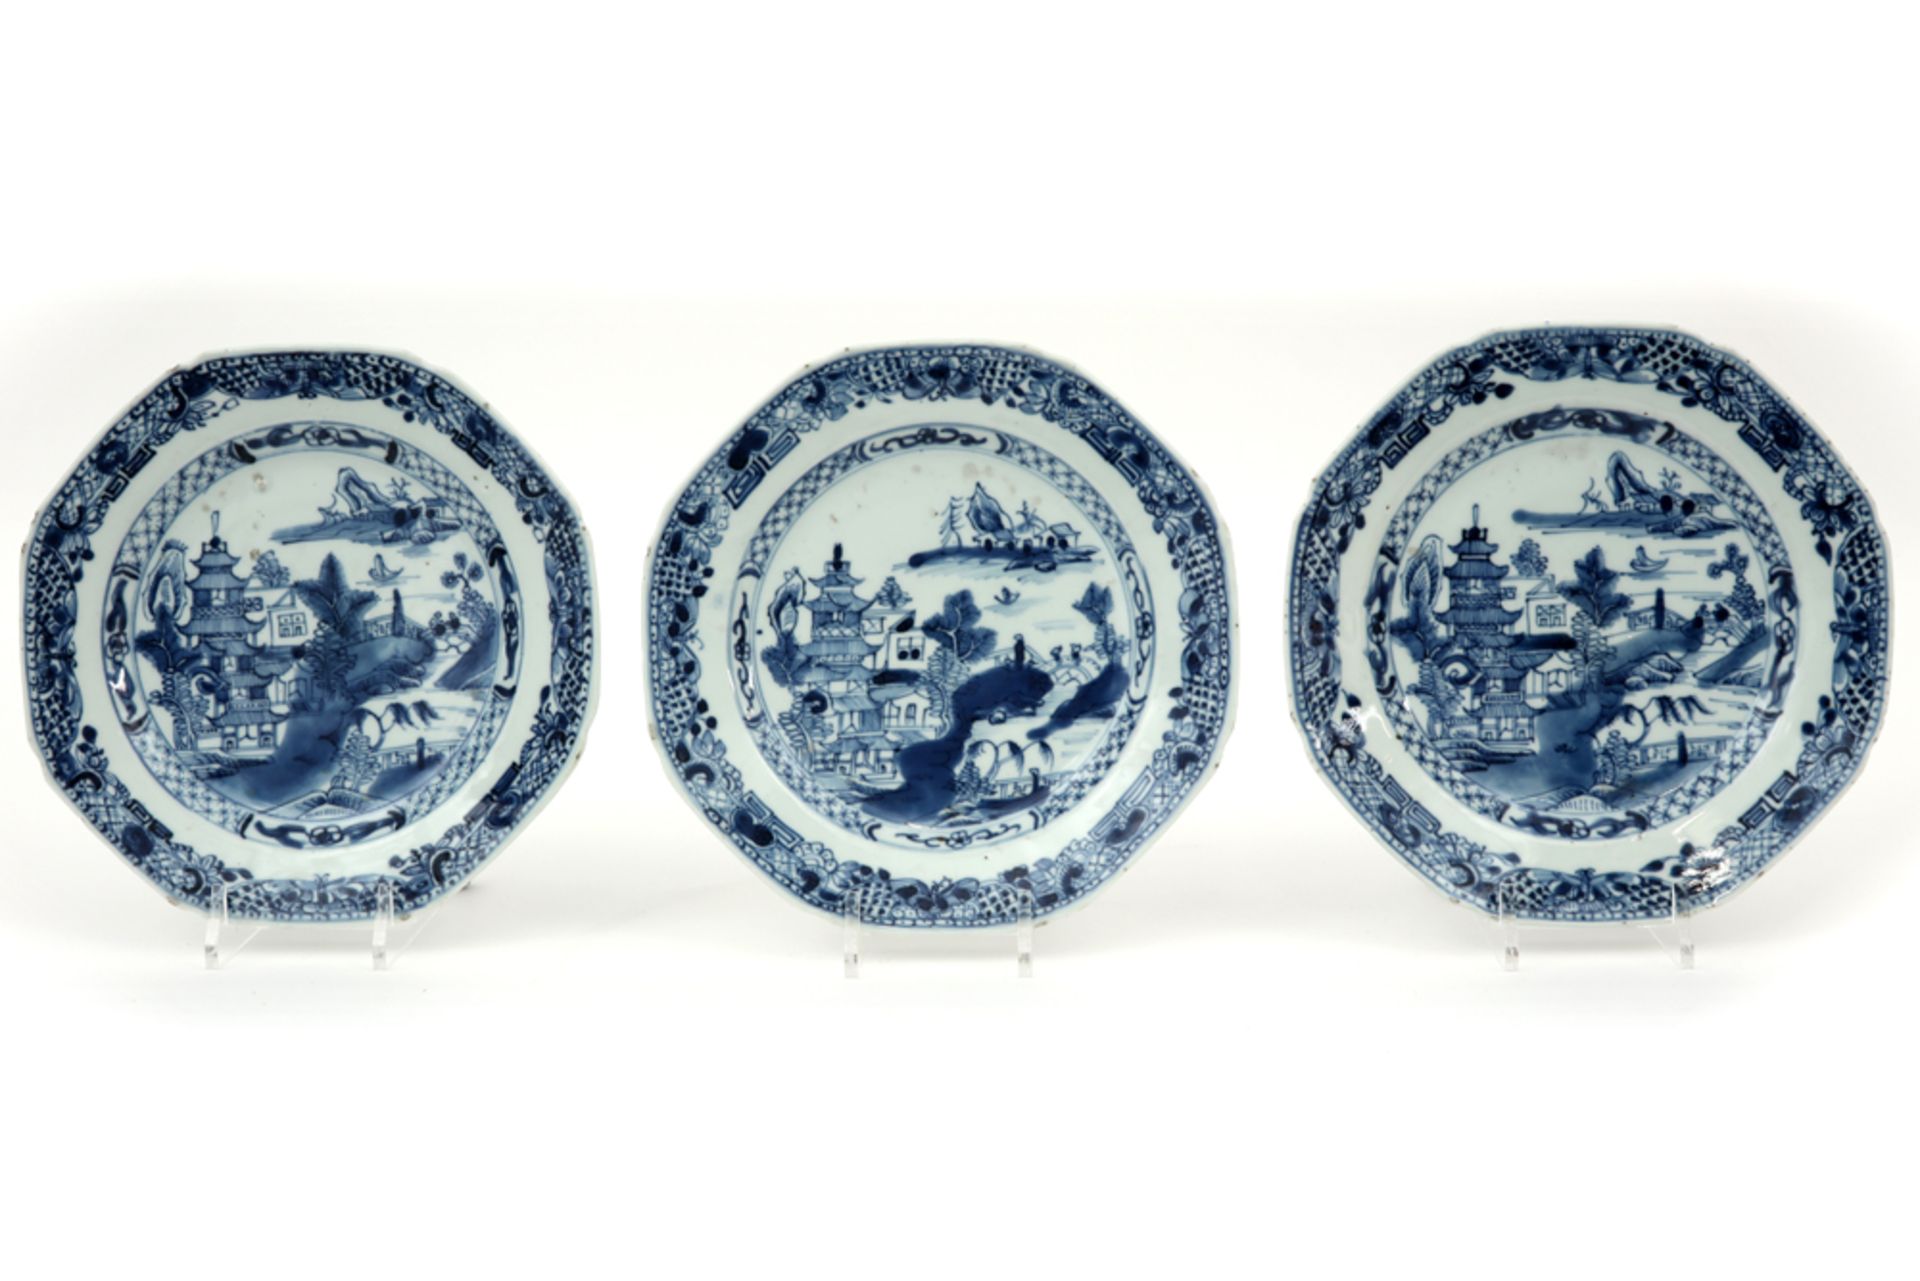 set of three octogonal 18th Cent. Chinese plates in porcelain with a blue-white decor || Reeks van